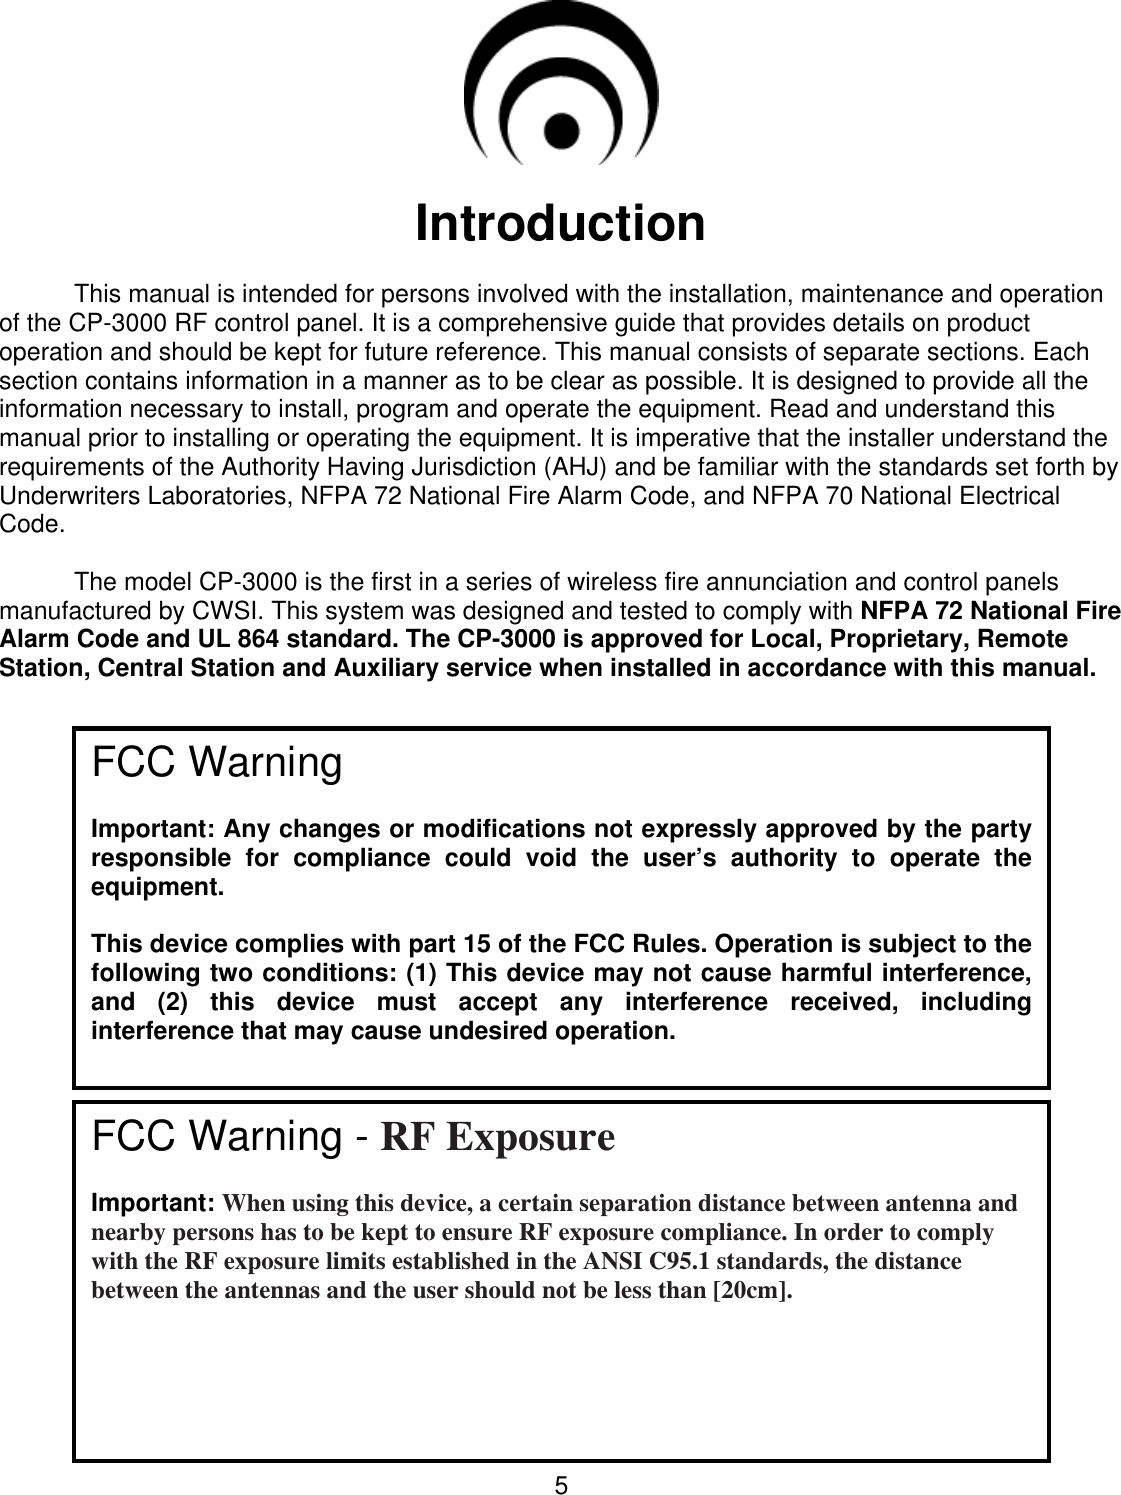  5   Introduction   This manual is intended for persons involved with the installation, maintenance and operation of the CP-3000 RF control panel. It is a comprehensive guide that provides details on product operation and should be kept for future reference. This manual consists of separate sections. Each section contains information in a manner as to be clear as possible. It is designed to provide all the information necessary to install, program and operate the equipment. Read and understand this manual prior to installing or operating the equipment. It is imperative that the installer understand the requirements of the Authority Having Jurisdiction (AHJ) and be familiar with the standards set forth by Underwriters Laboratories, NFPA 72 National Fire Alarm Code, and NFPA 70 National Electrical Code.    The model CP-3000 is the first in a series of wireless fire annunciation and control panels manufactured by CWSI. This system was designed and tested to comply with NFPA 72 National Fire Alarm Code and UL 864 standard. The CP-3000 is approved for Local, Proprietary, Remote Station, Central Station and Auxiliary service when installed in accordance with this manual.                                                                                                                            FCC Warning  Important: Any changes or modifications not expressly approved by the party responsible  for  compliance  could  void  the  user’s  authority  to  operate  the equipment.  This device complies with part 15 of the FCC Rules. Operation is subject to the following two conditions: (1) This device may not cause harmful interference, and  (2)  this  device  must  accept  any  interference  received,  including interference that may cause undesired operation.  FCC Warning - RF Exposure  Important: When using this device, a certain separation distance between antenna and nearby persons has to be kept to ensure RF exposure compliance. In order to comply with the RF exposure limits established in the ANSI C95.1 standards, the distance between the antennas and the user should not be less than [20cm].  